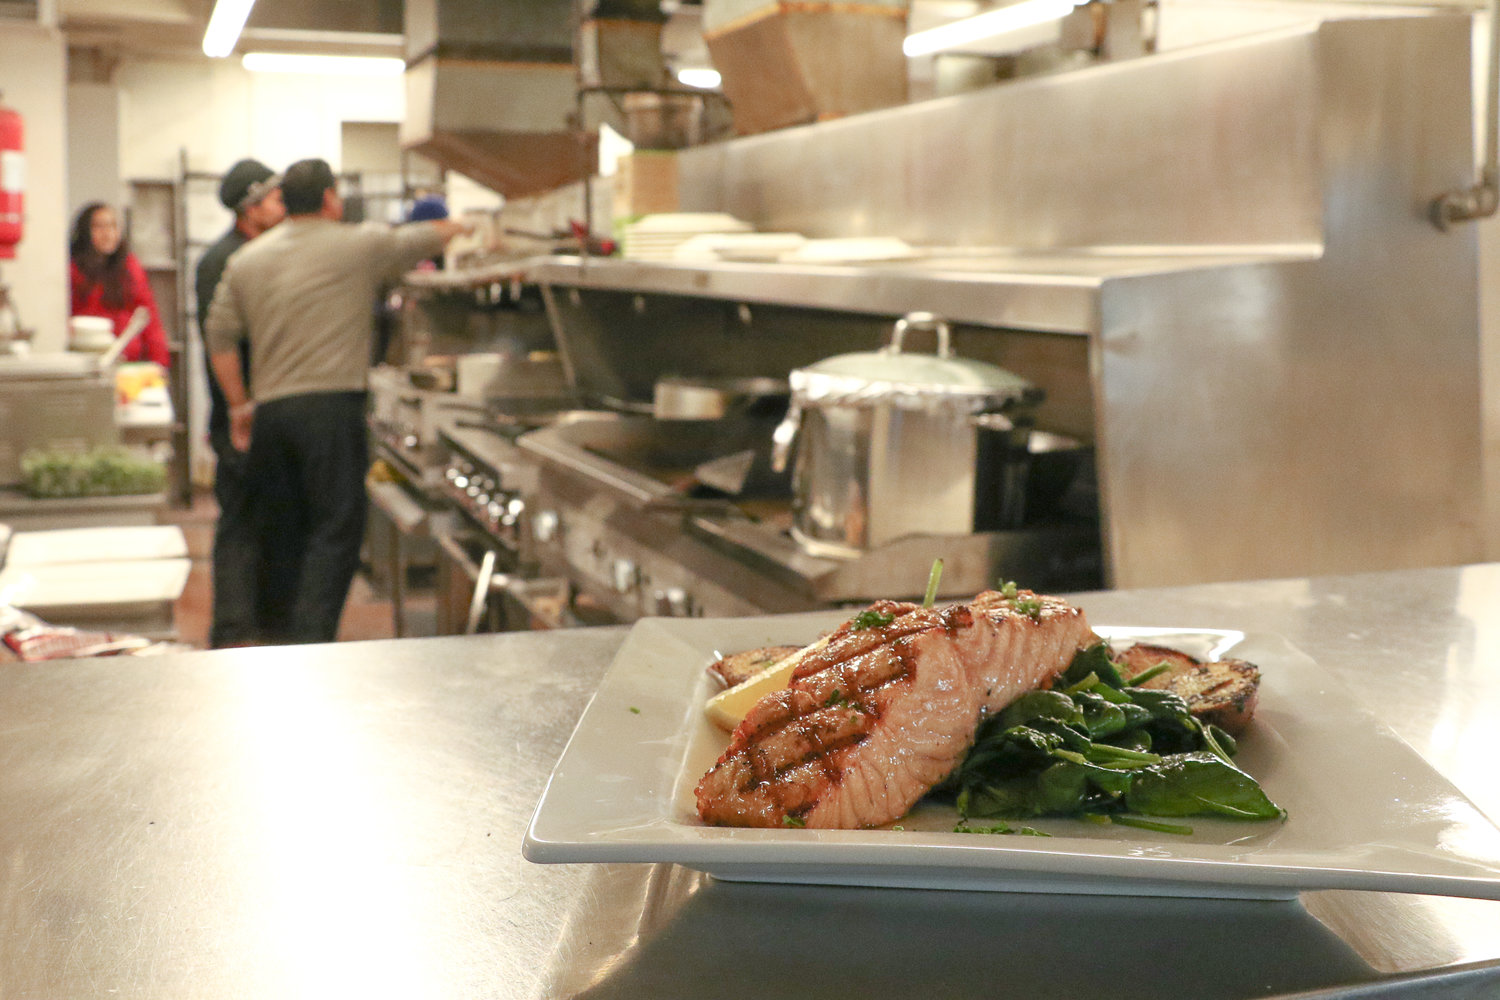 An eight ounce king salmon filet sits atop a bed of sauted spinach after being grilled to perfection by Ocean Prime owner and chef Eyner "Rene" Cardona.